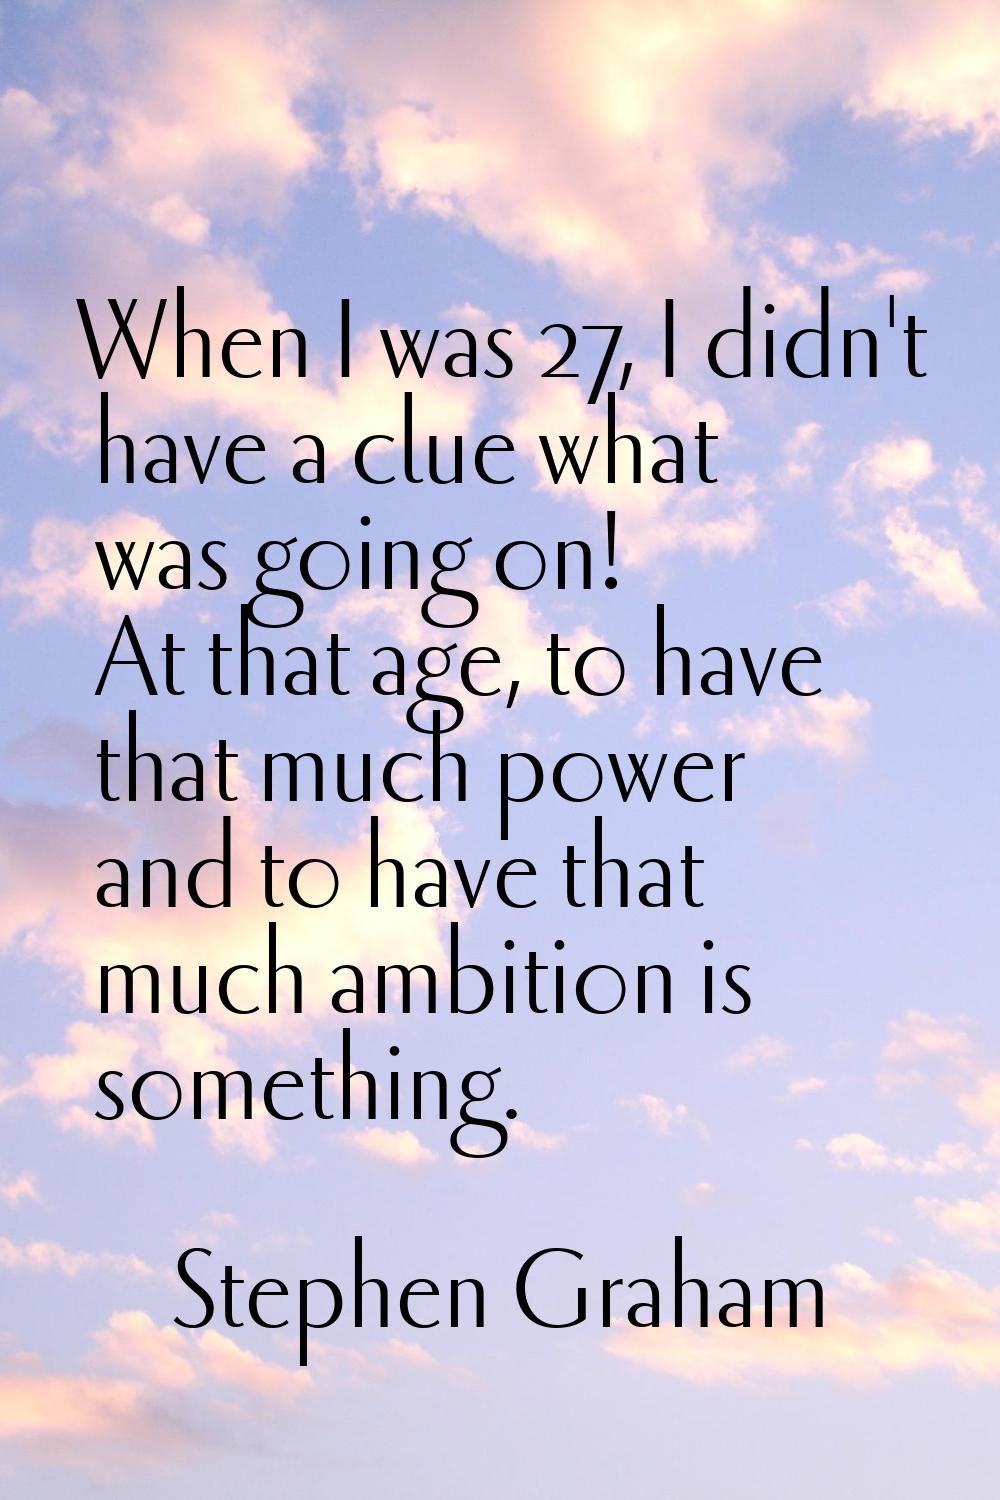 When I was 27, I didn't have a clue what was going on! At that age, to have that much power and to 